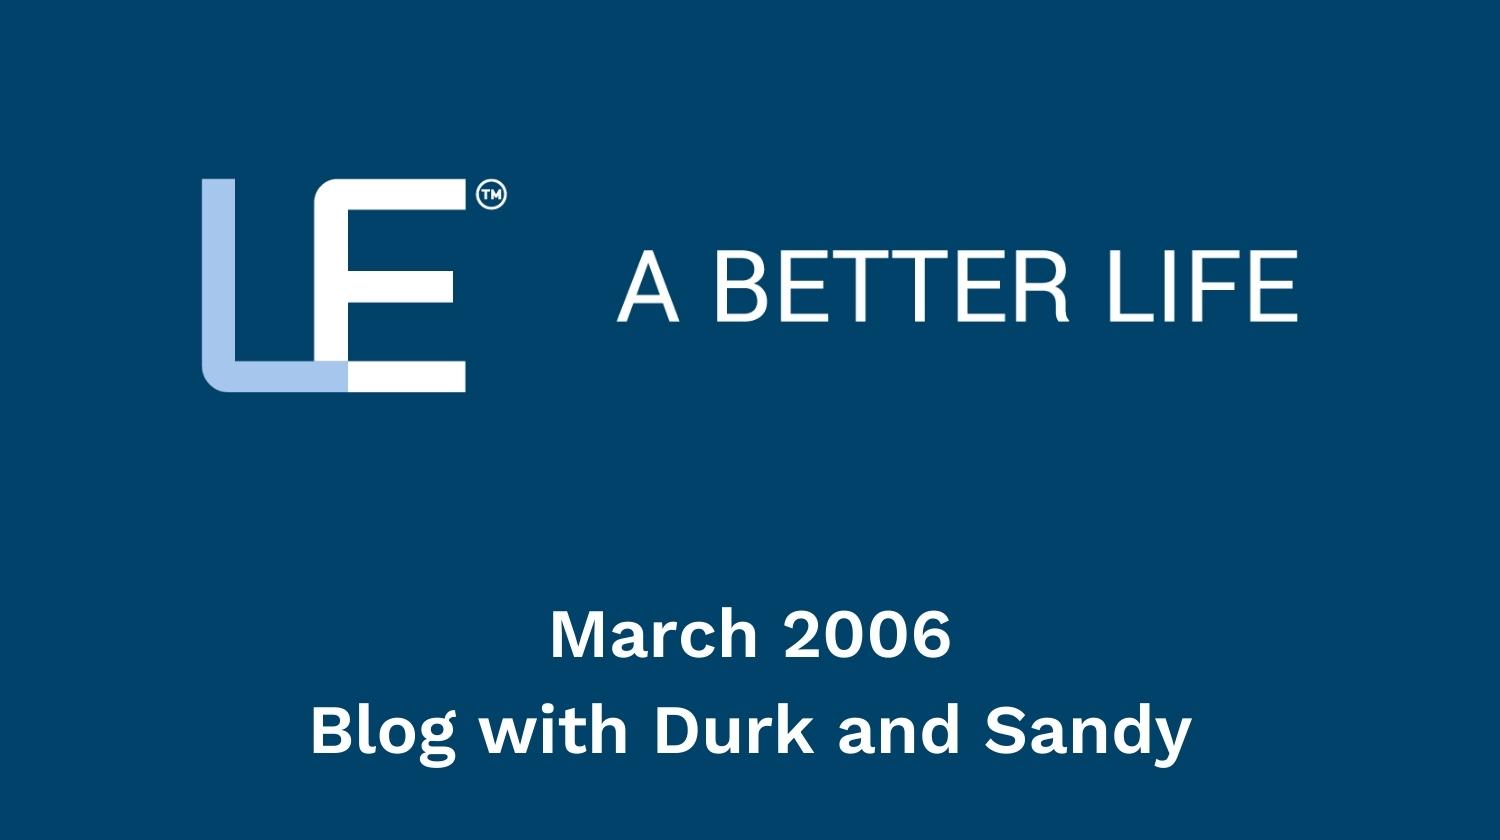 March 2006 Blog with Durk and Sandy